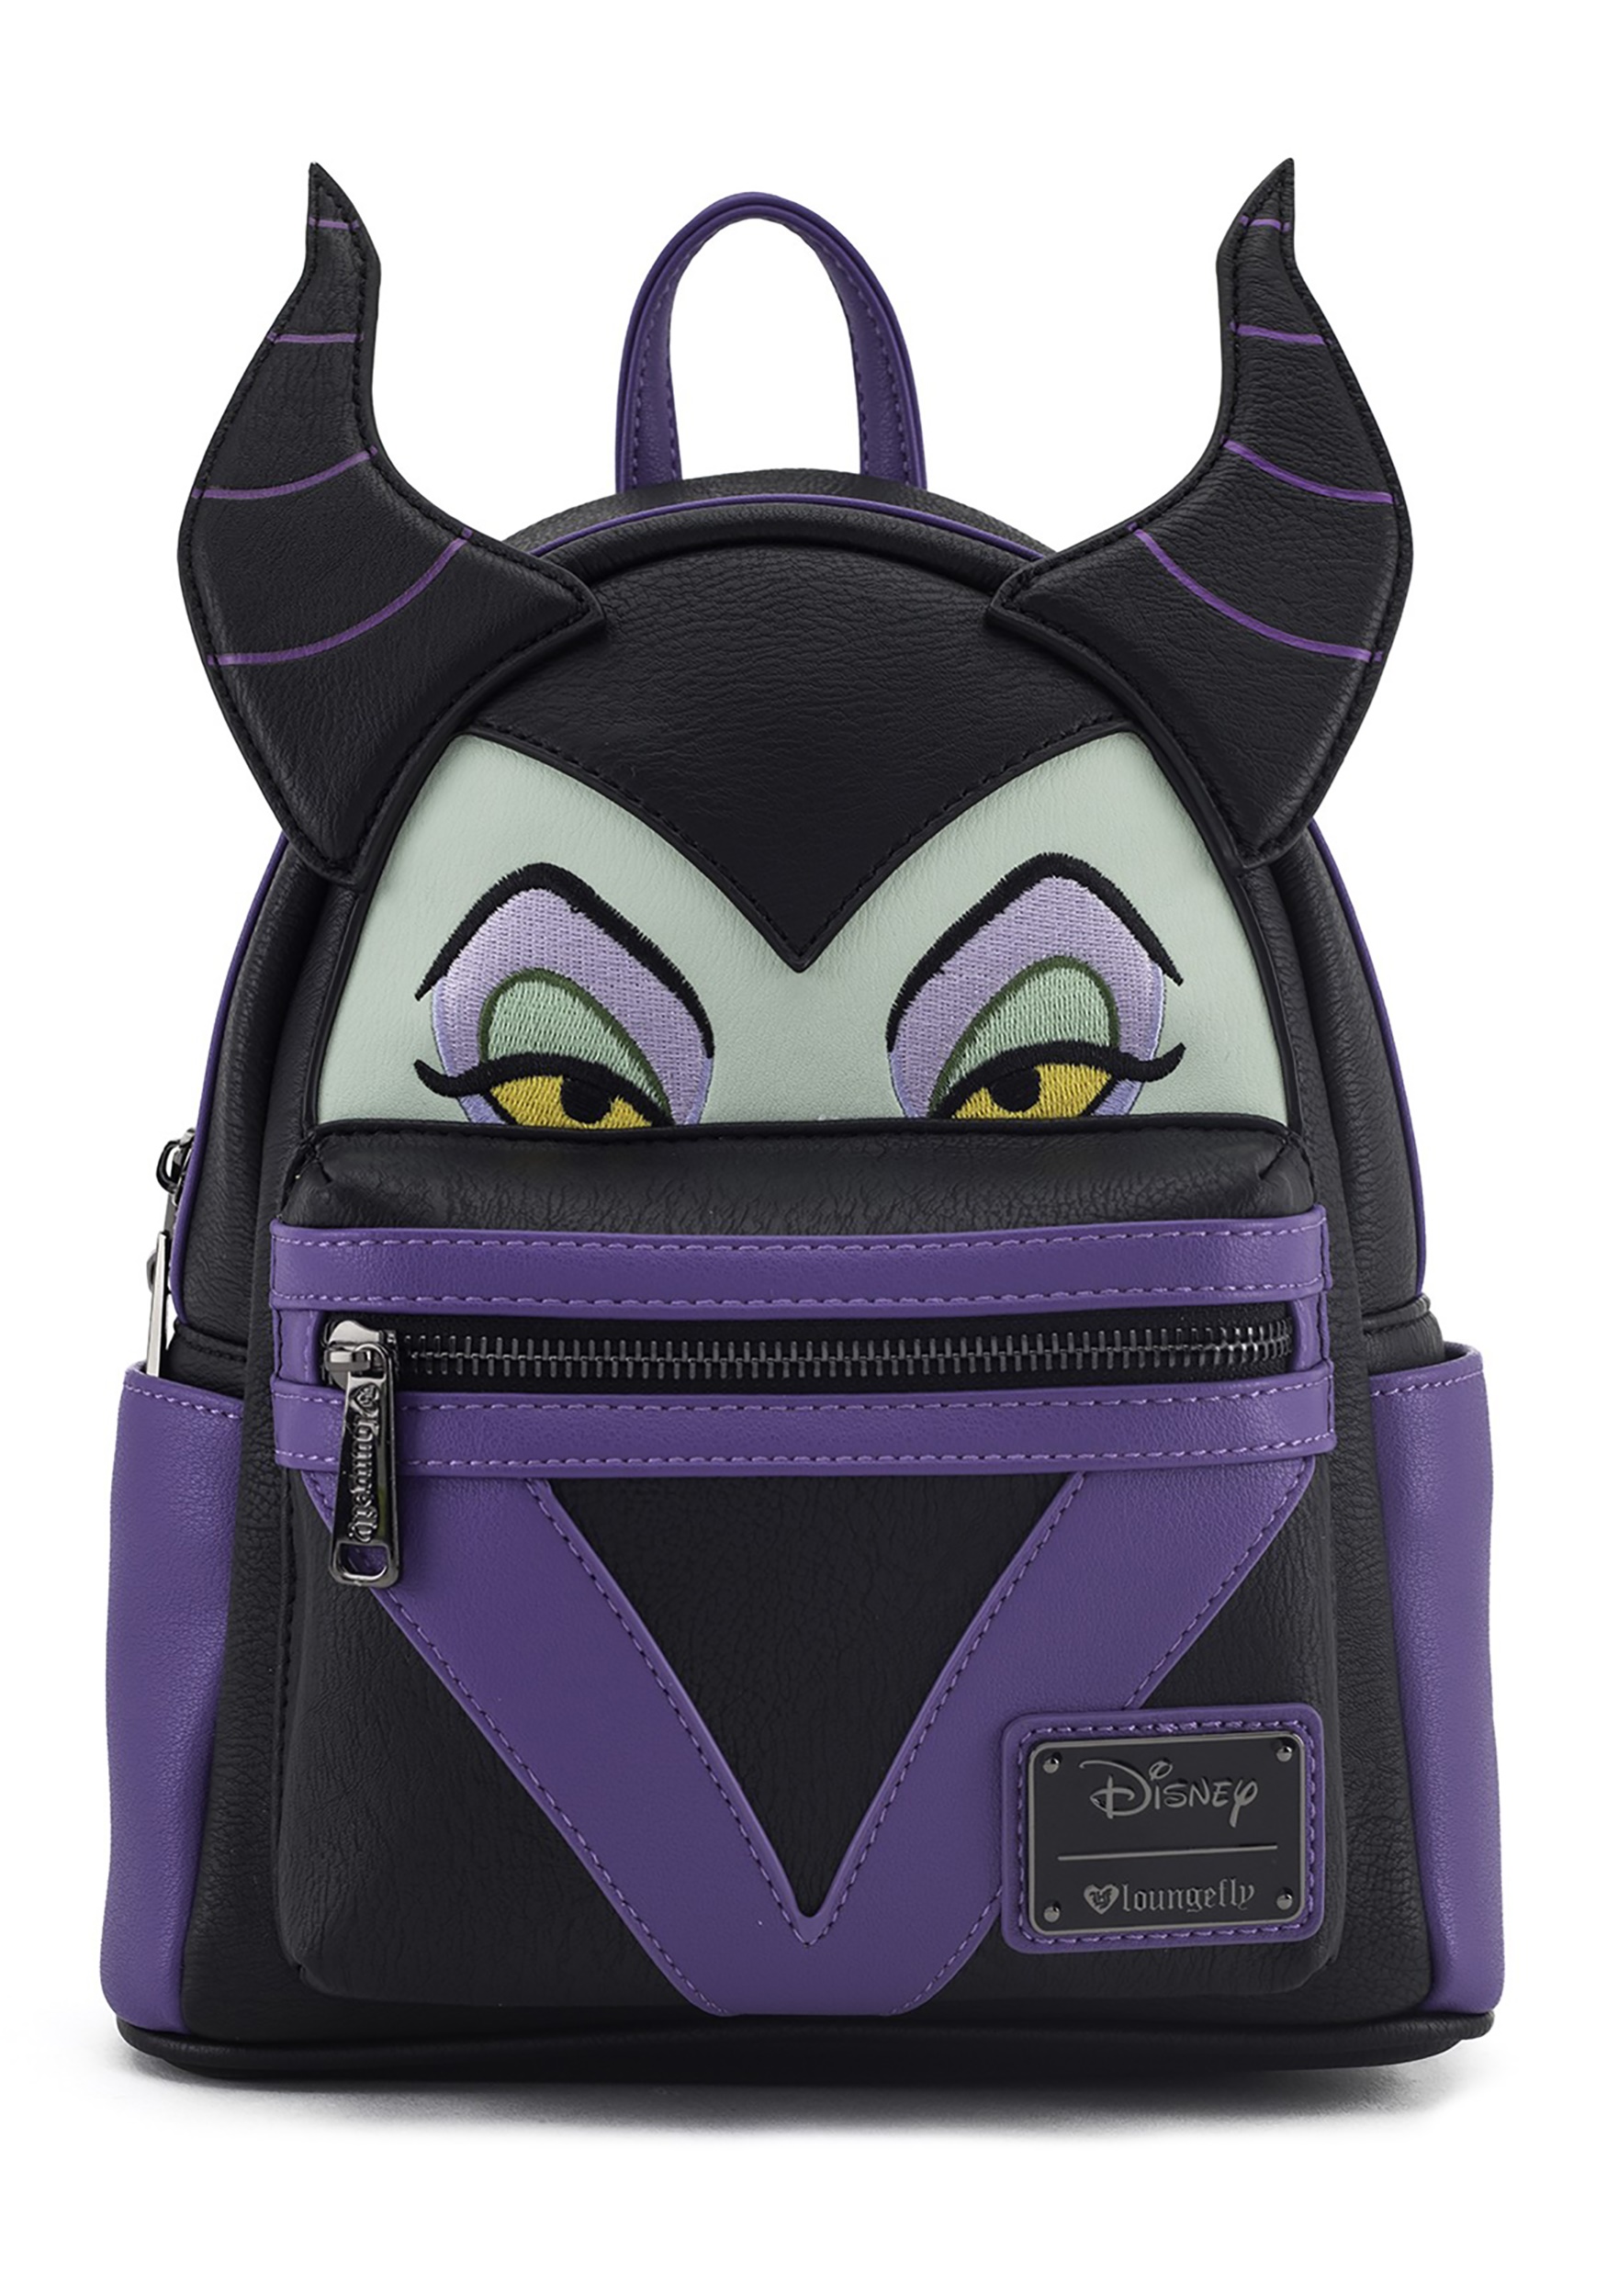 Maleficent Faux Leather Mini Backpack by Loungefly